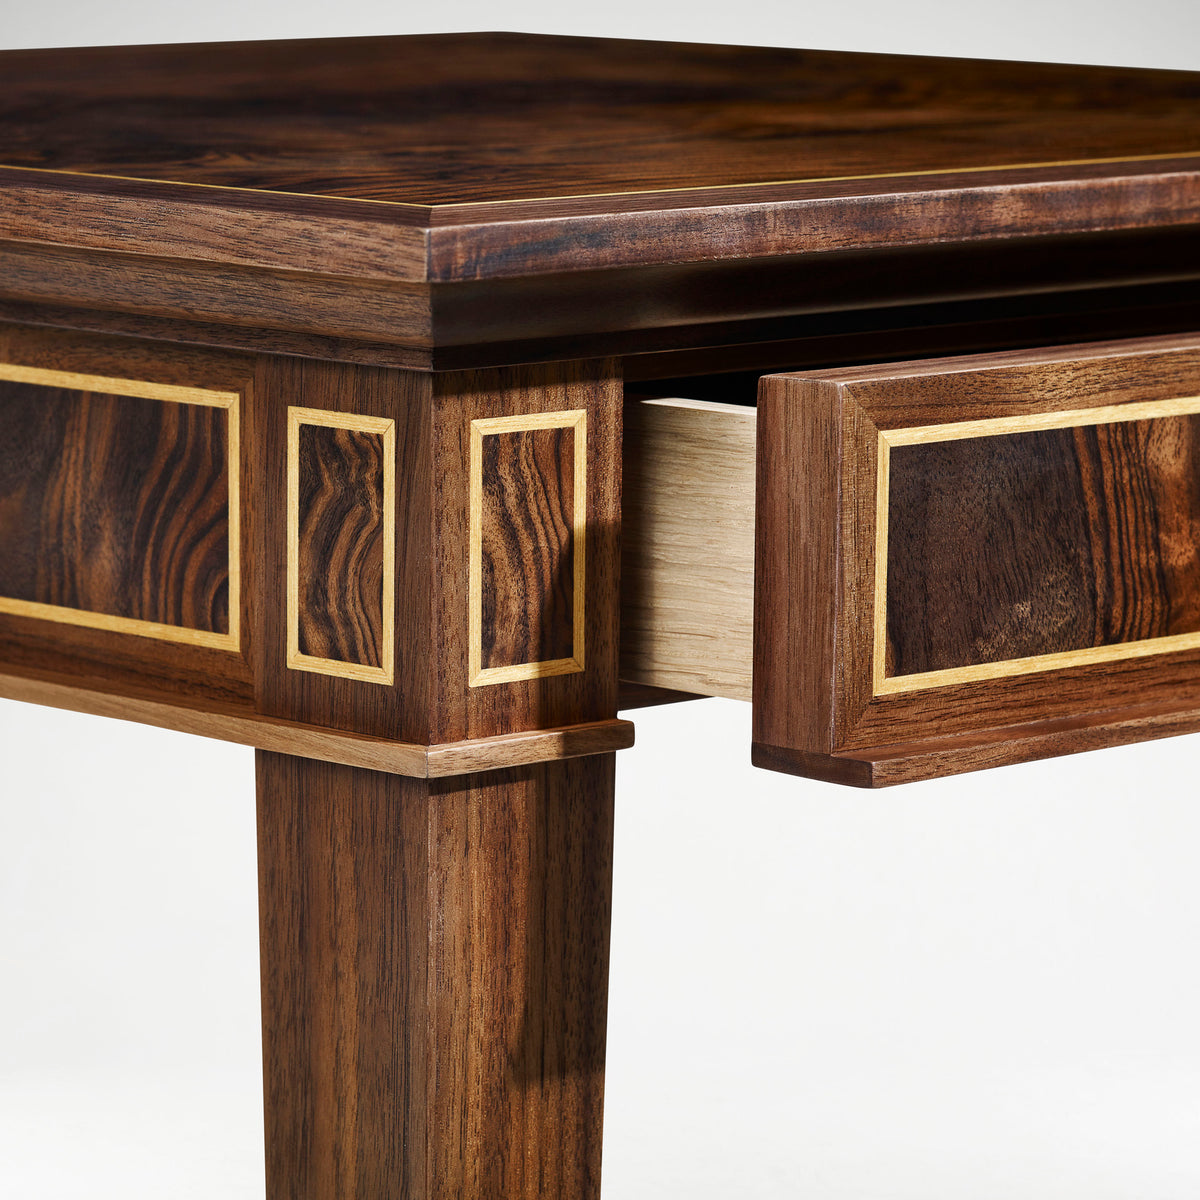 LINLEY Classic Bedside Table | Bespoke Design & Luxury Furniture | LINLEY